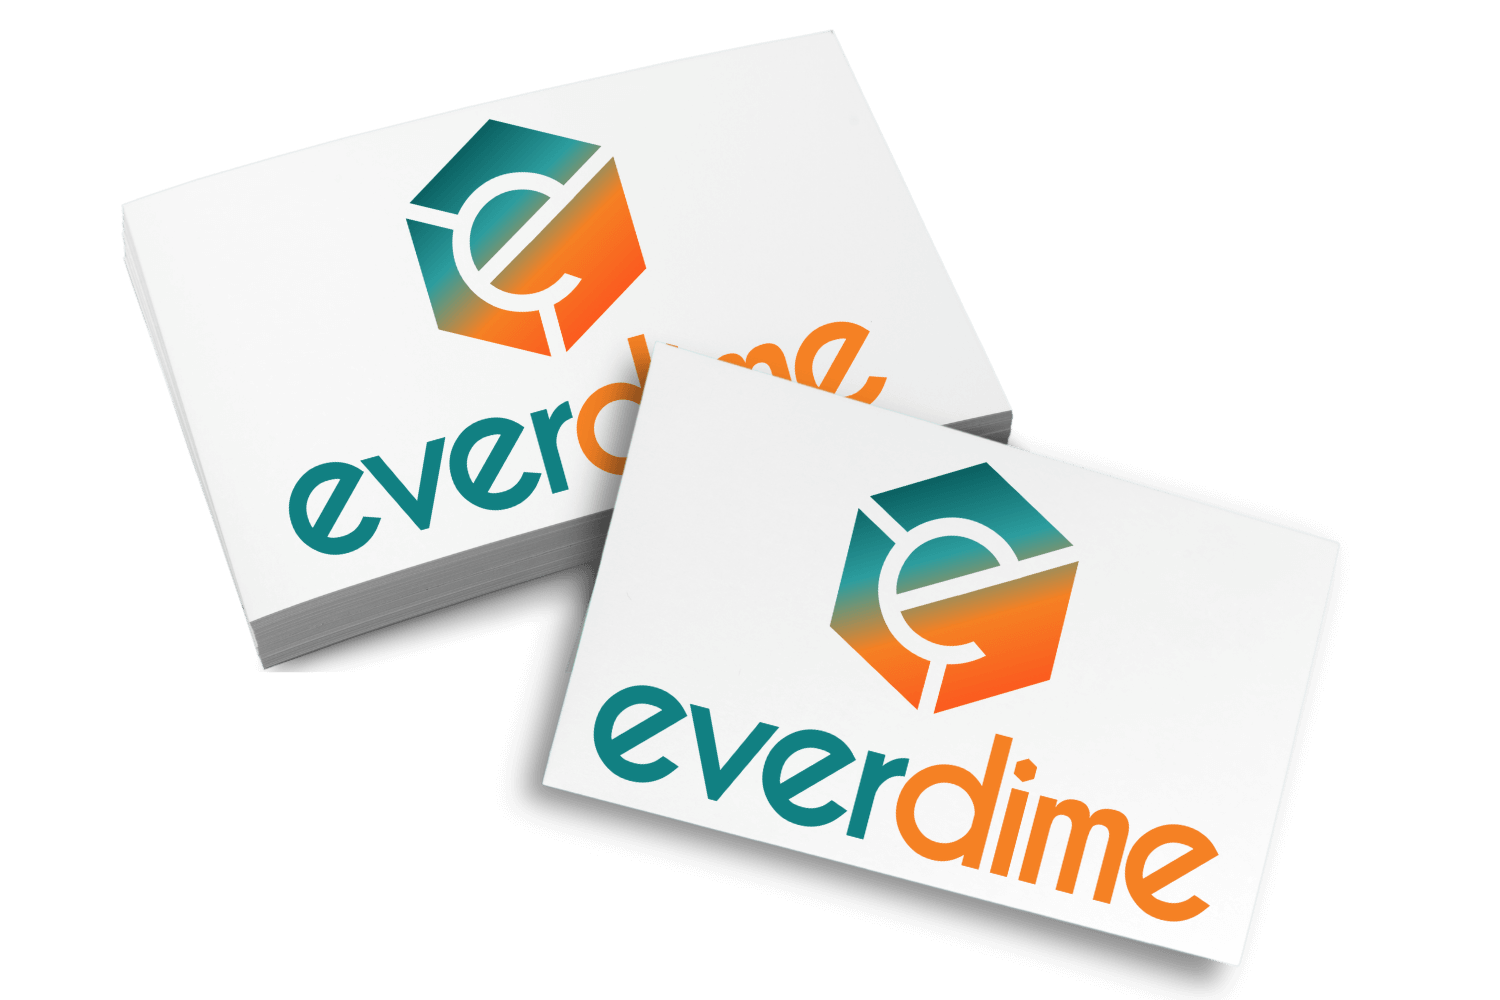 Everdime company logo business card mockup graphic design at Big Red Jelly.